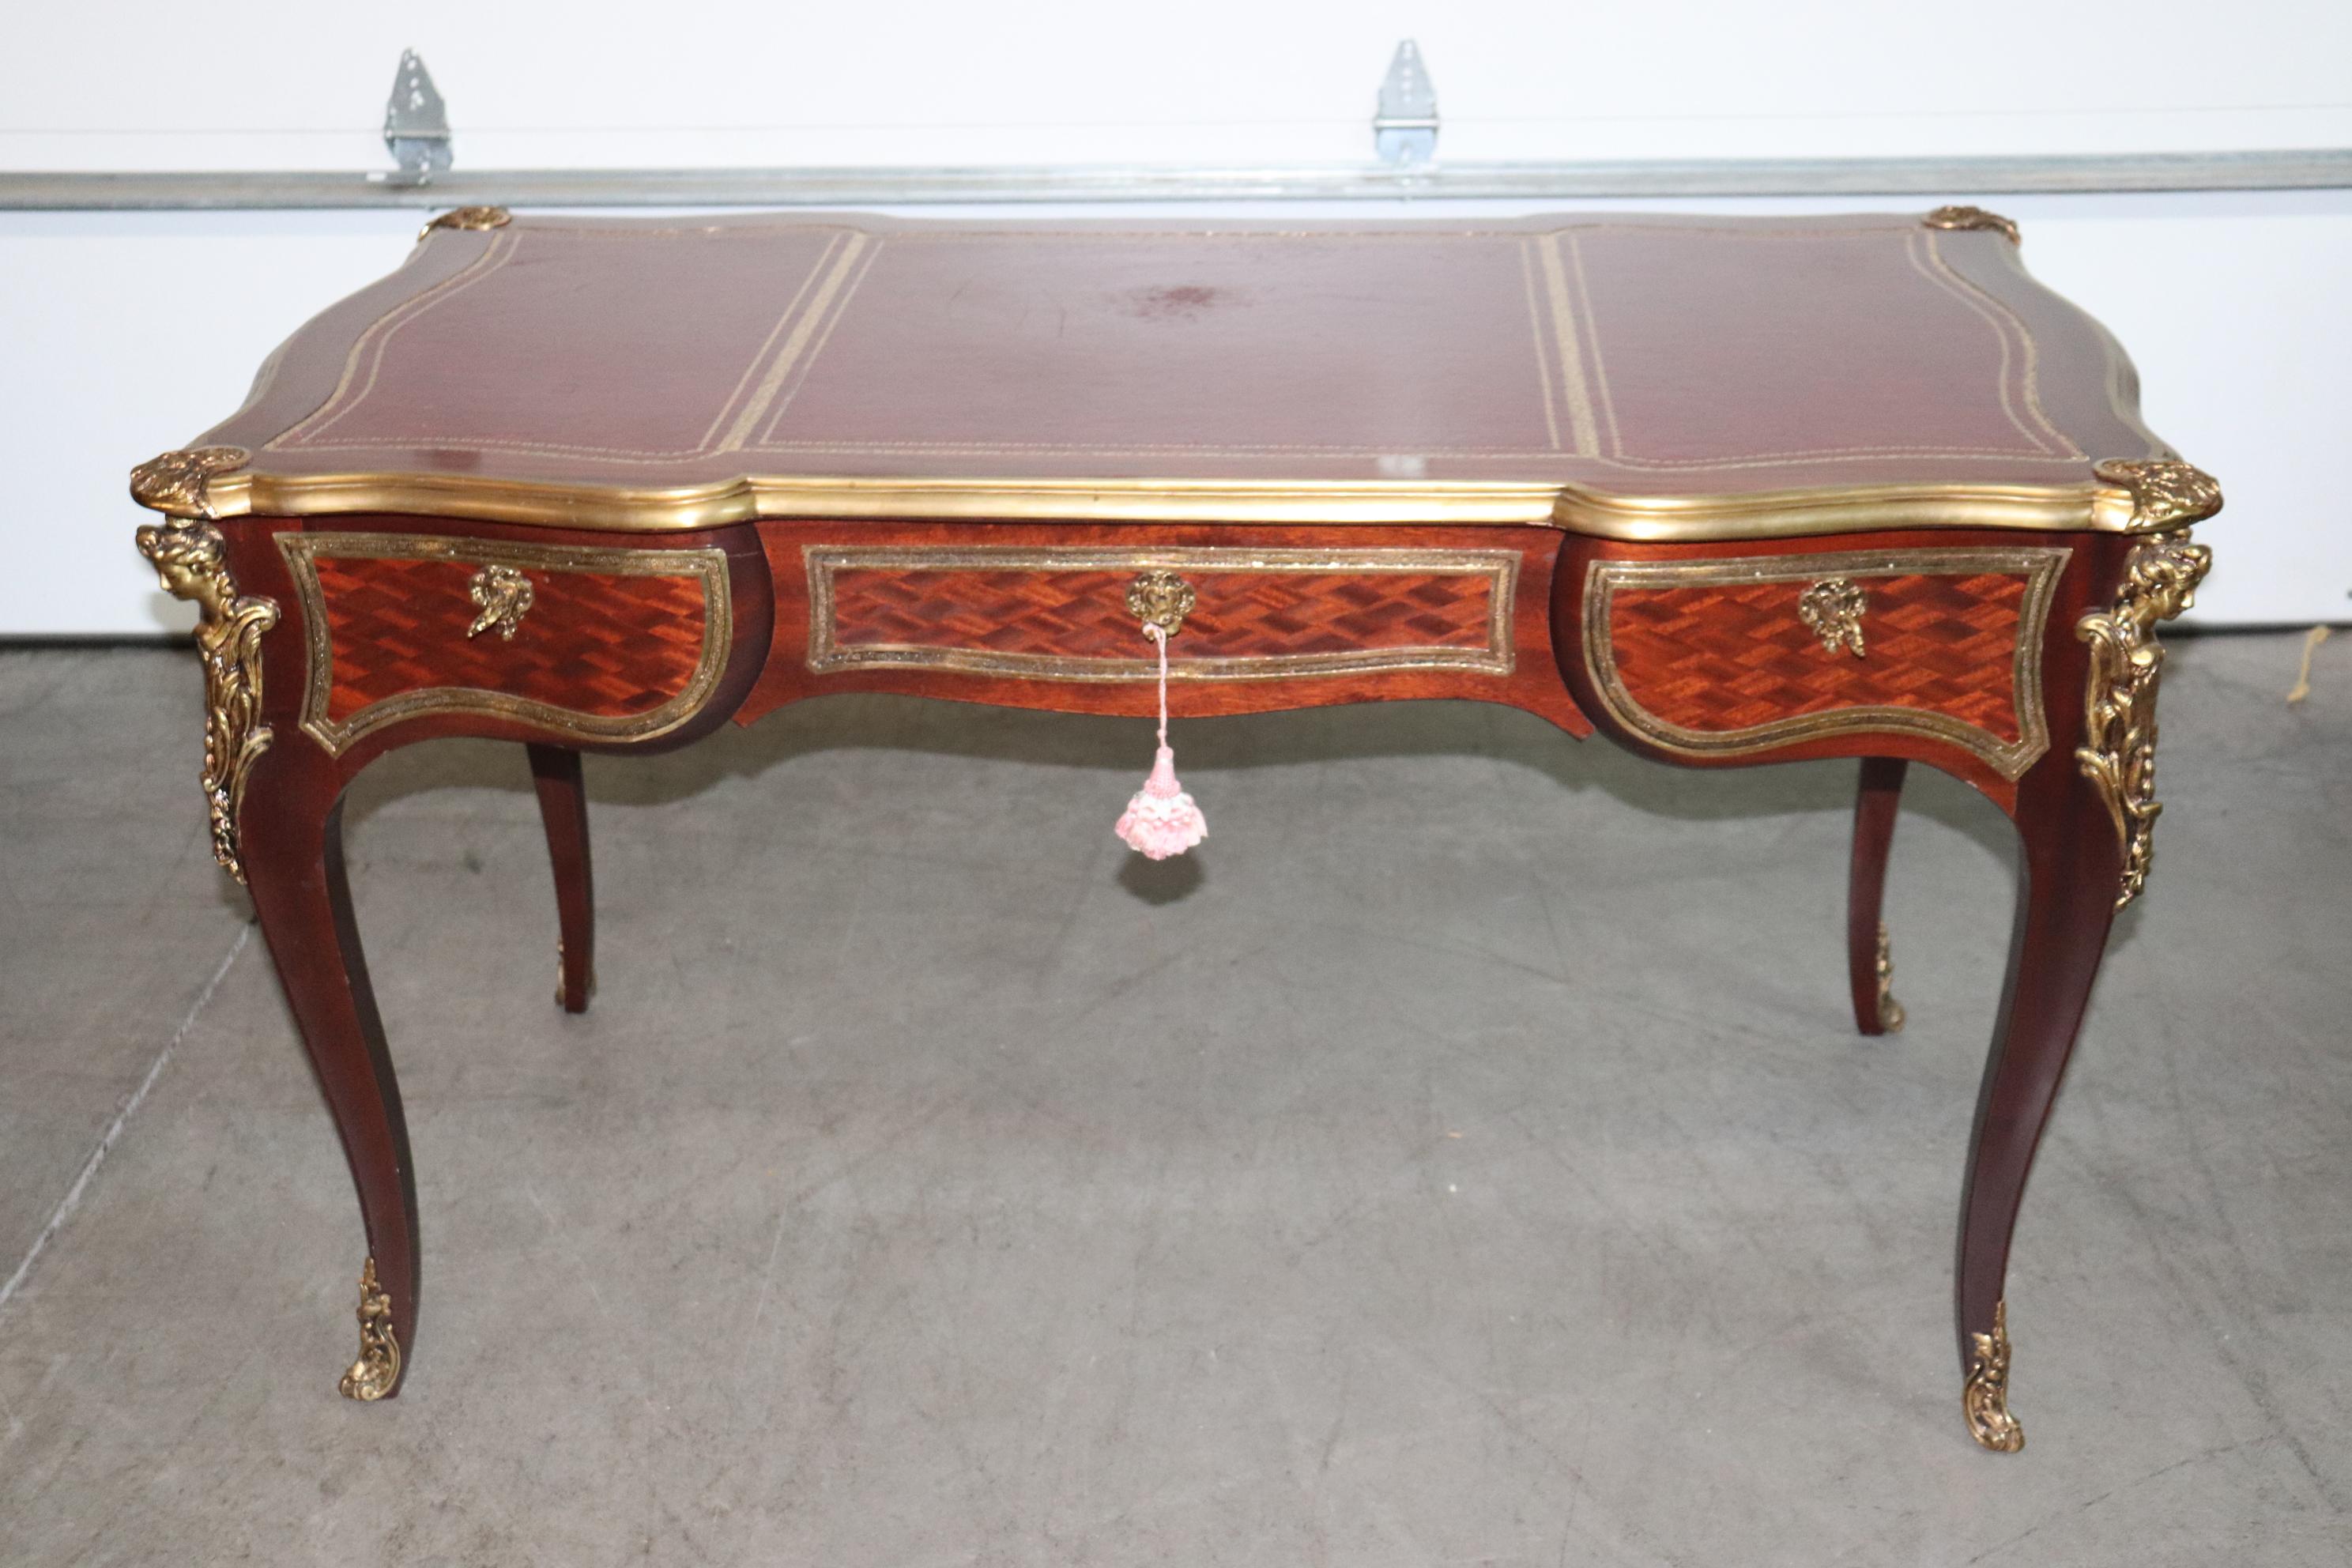 This is a fine quality French-made bronze mounted and trimmed writing desk. The desk features gorgeous bronze trimmed wrap around moldings around the top and highly detailed bronze maidens on each corner. The desk also features beautiful mahogany